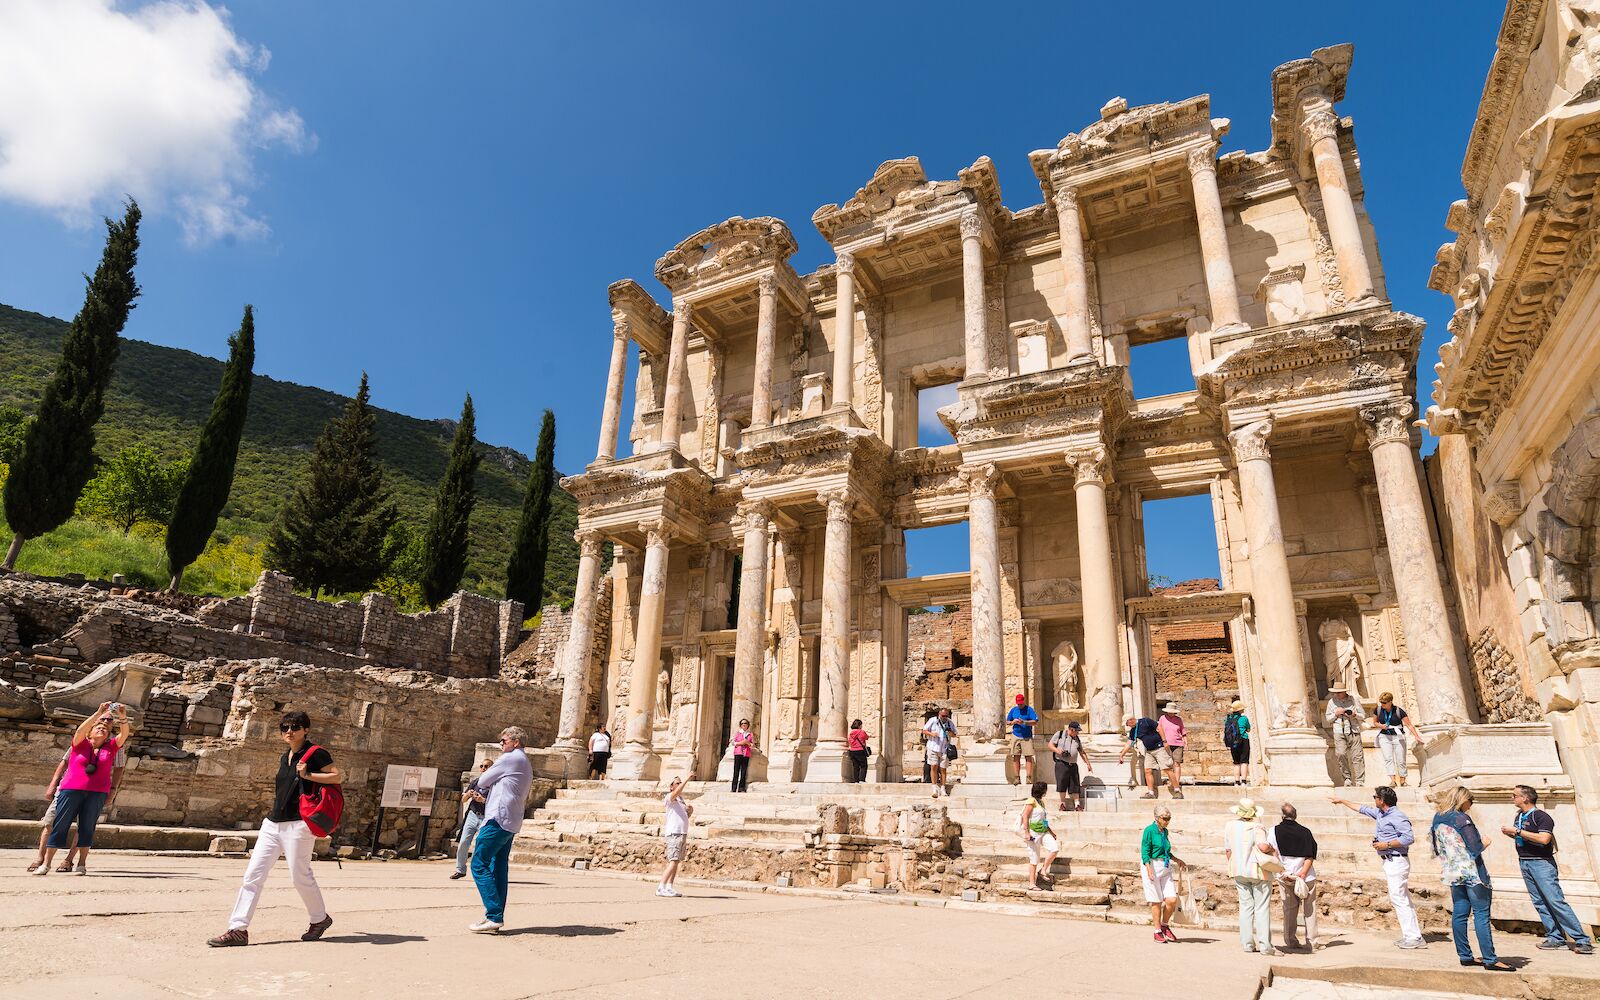 Ephesus in Türkiye is the location of many cruise ship excursions